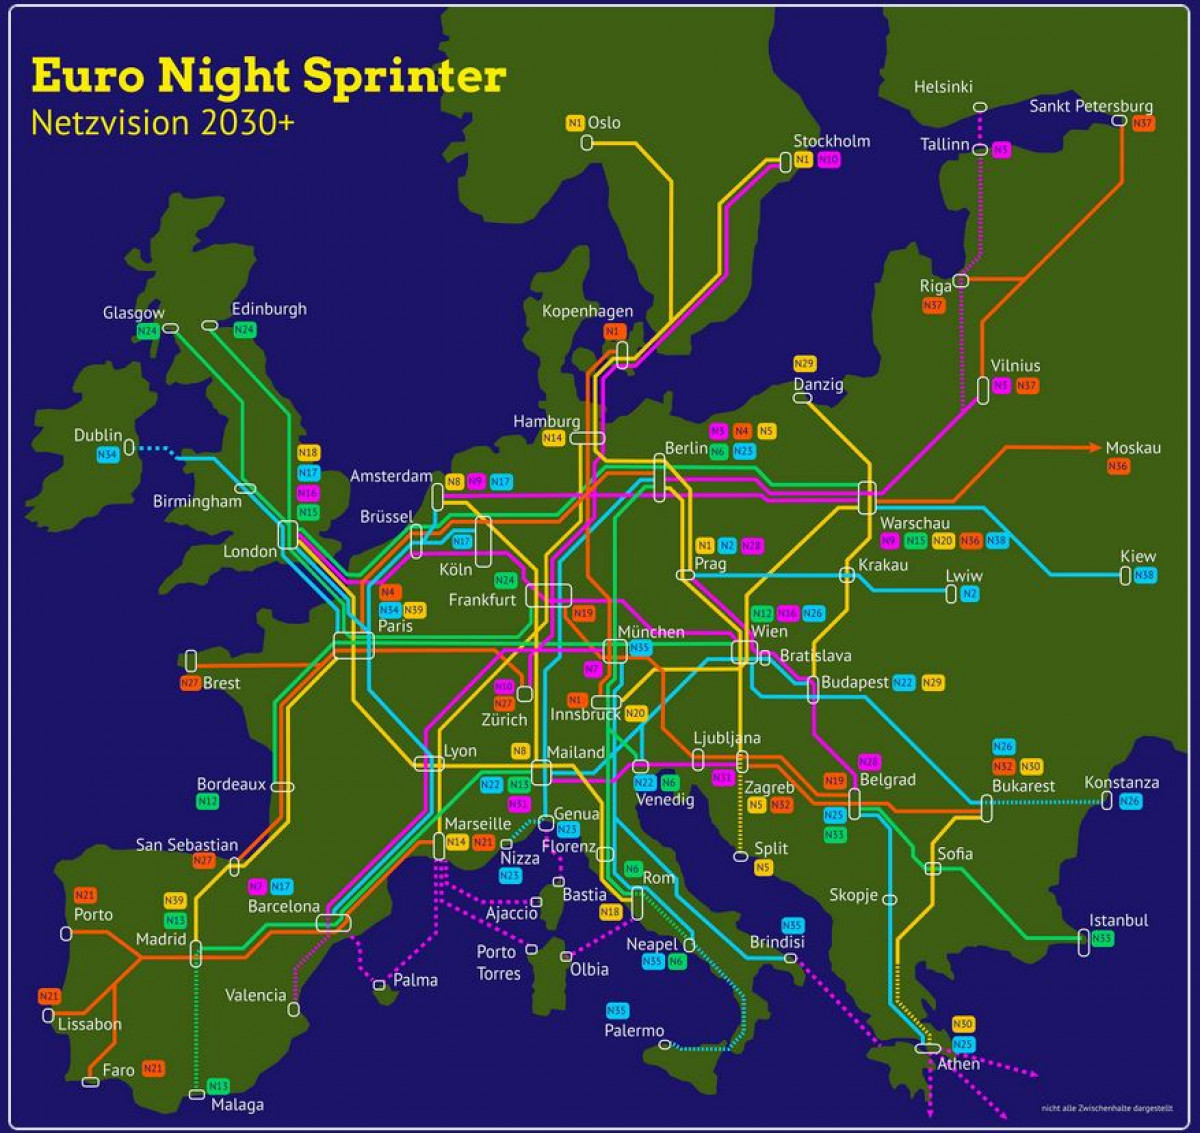 Trains in Europe, Train Services in Europe